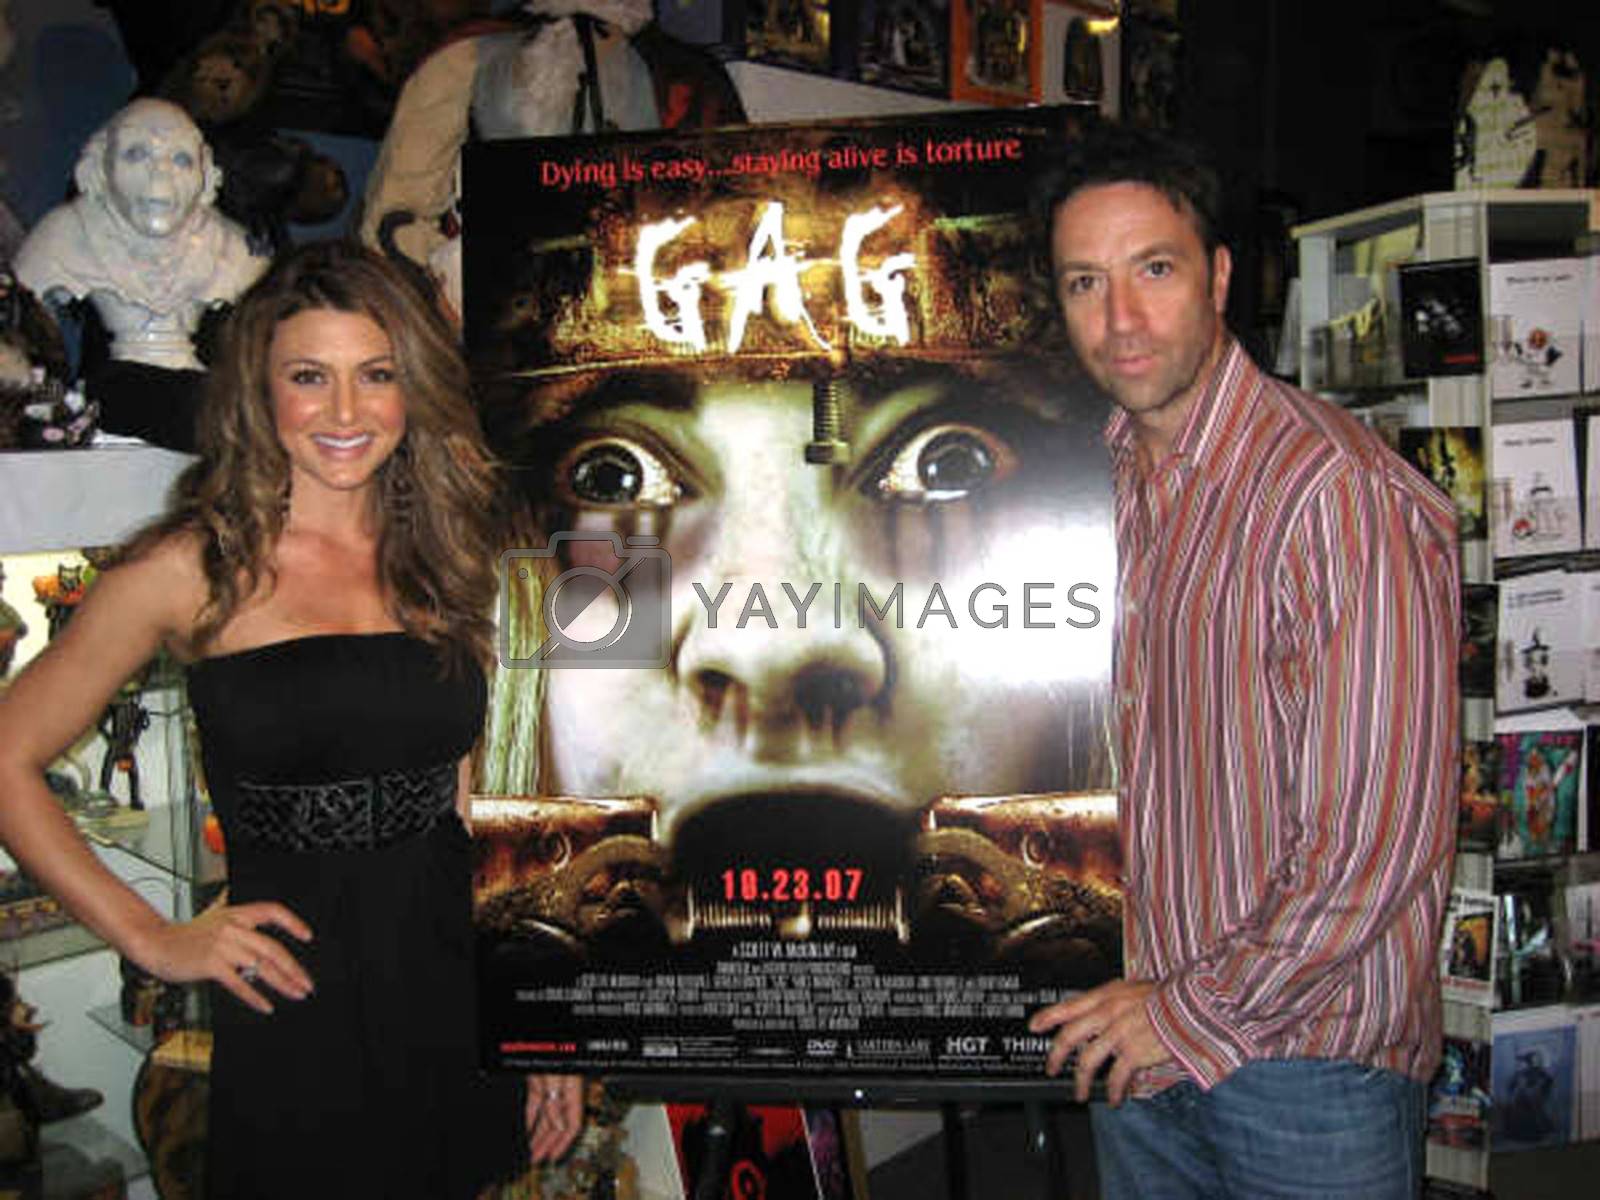 Cerina Vincent And Scott W. McKinlay At An In Store Appearance To Promote The Upcoming October 23rd DVD Release Of GAG, Dark Delicacies, Burbank, CA 10 20 07 ImageCollect By ImageCollect Vectors & Illustrations With Unlimited